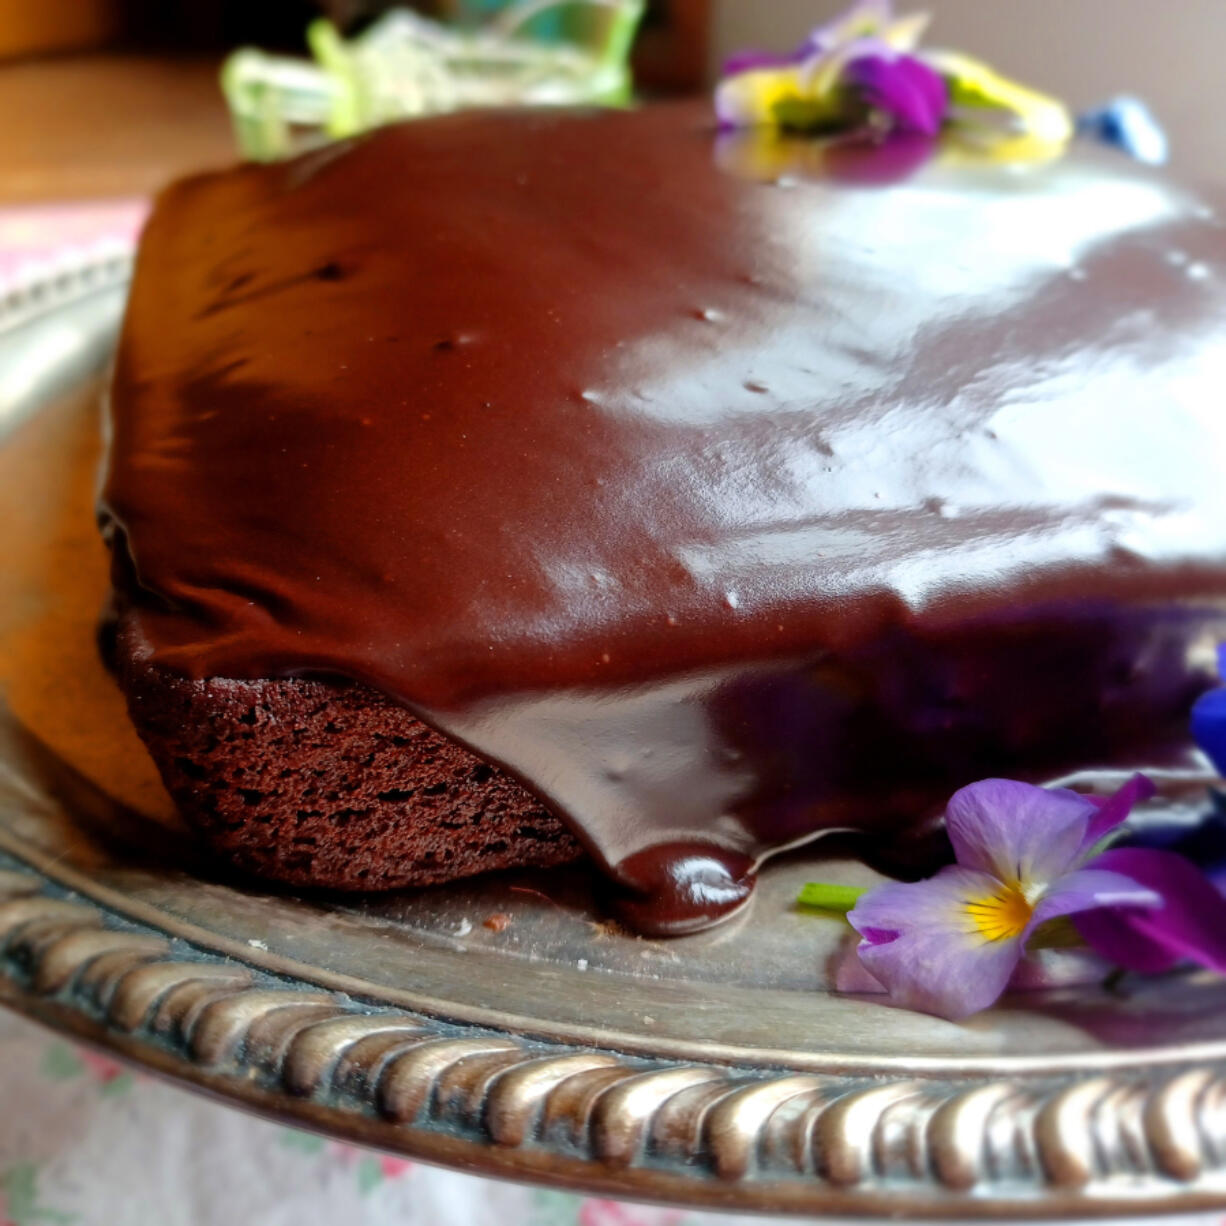 This crazy chocolate cake &mdash; aka Depression cake or wacky cake &mdash; uses no eggs, butter or milk. But maybe it should.